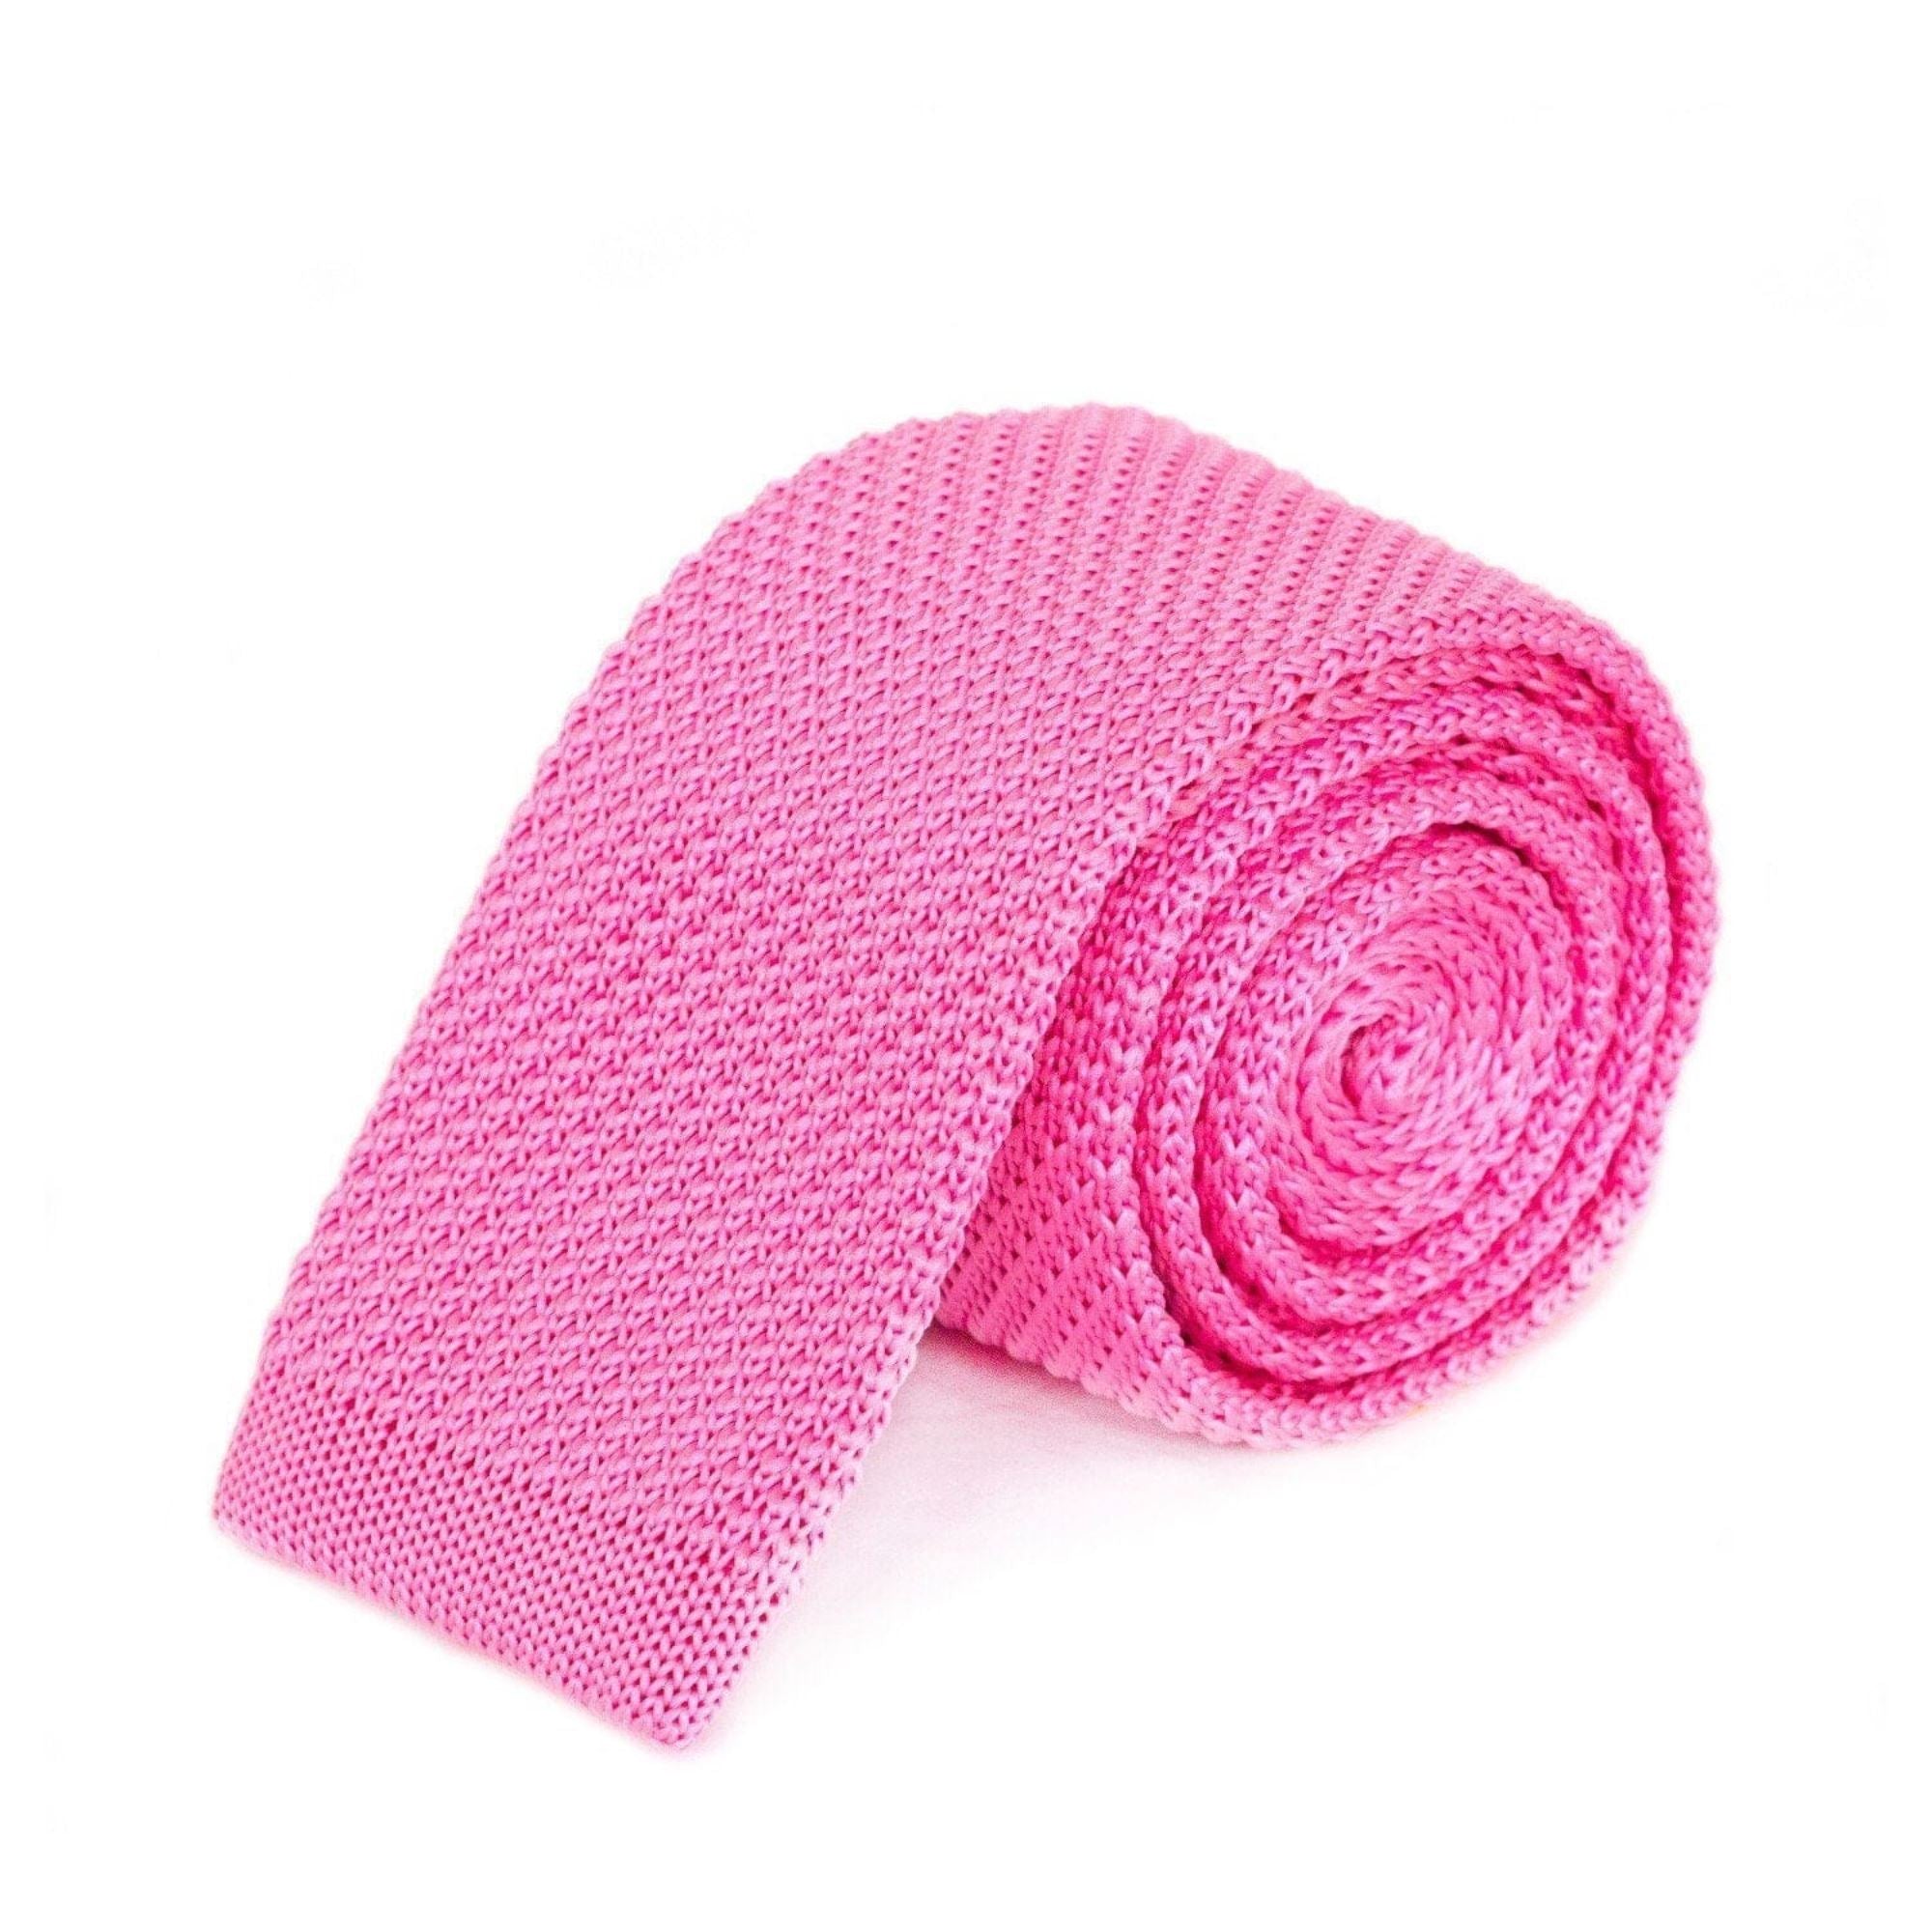 Pink Knitted Tie Ties Cuffed.com.au 